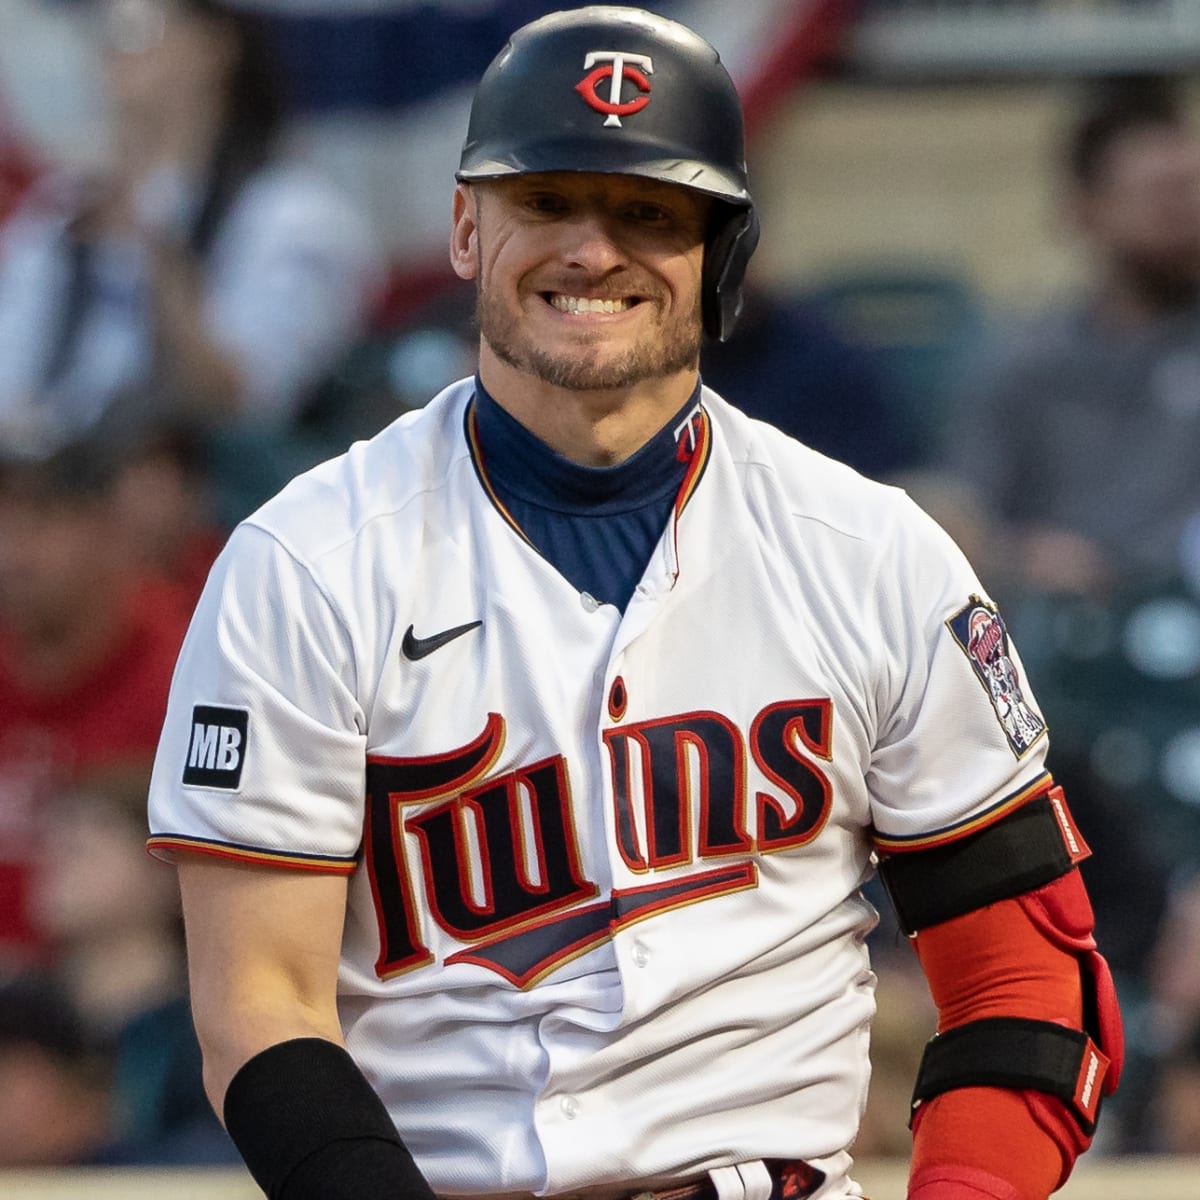 Yankees acquire Josh Donaldson, trade Gary Sanchez in five-player